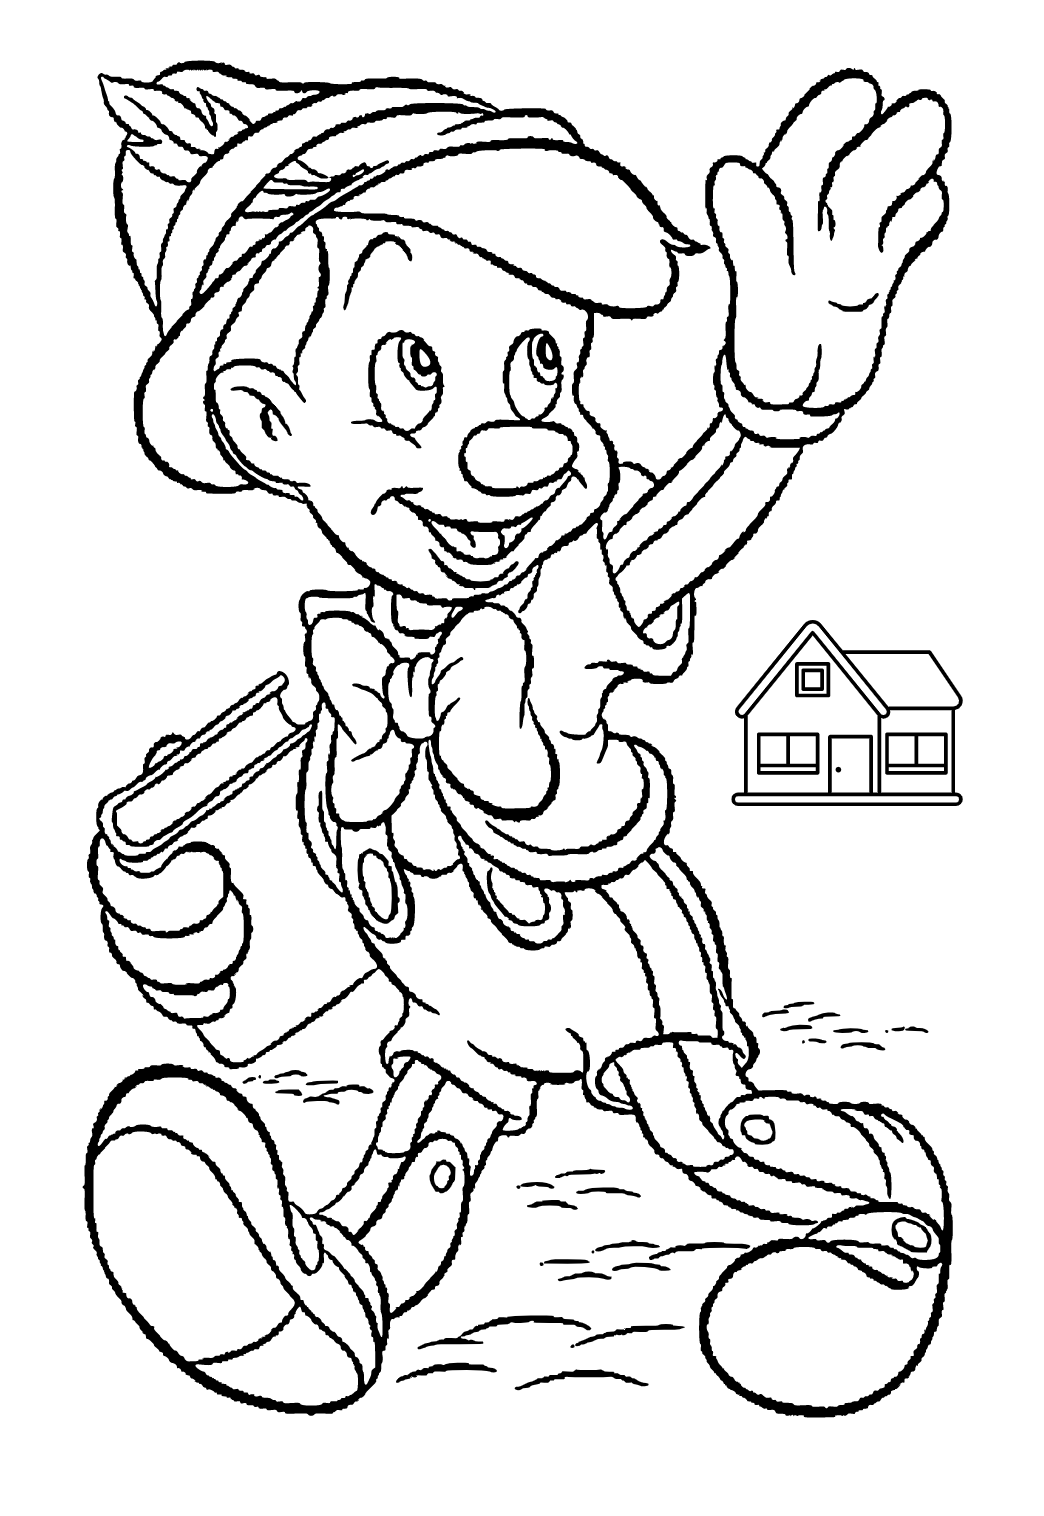 Free printable disney pinocchio coloring page for adults and kids